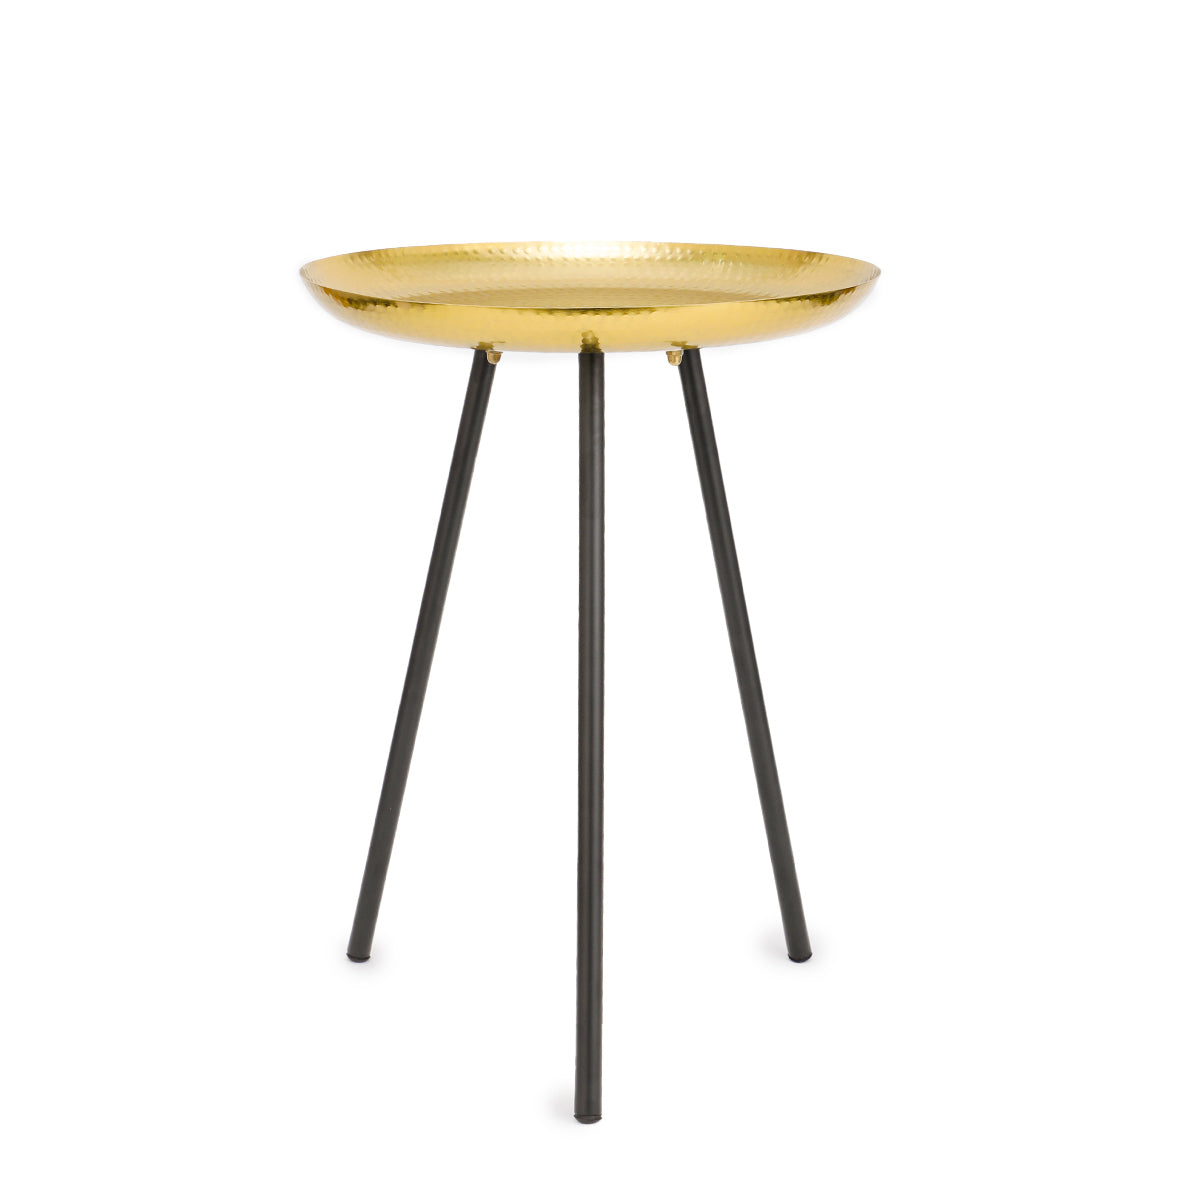 Lynx Hammered Side Table